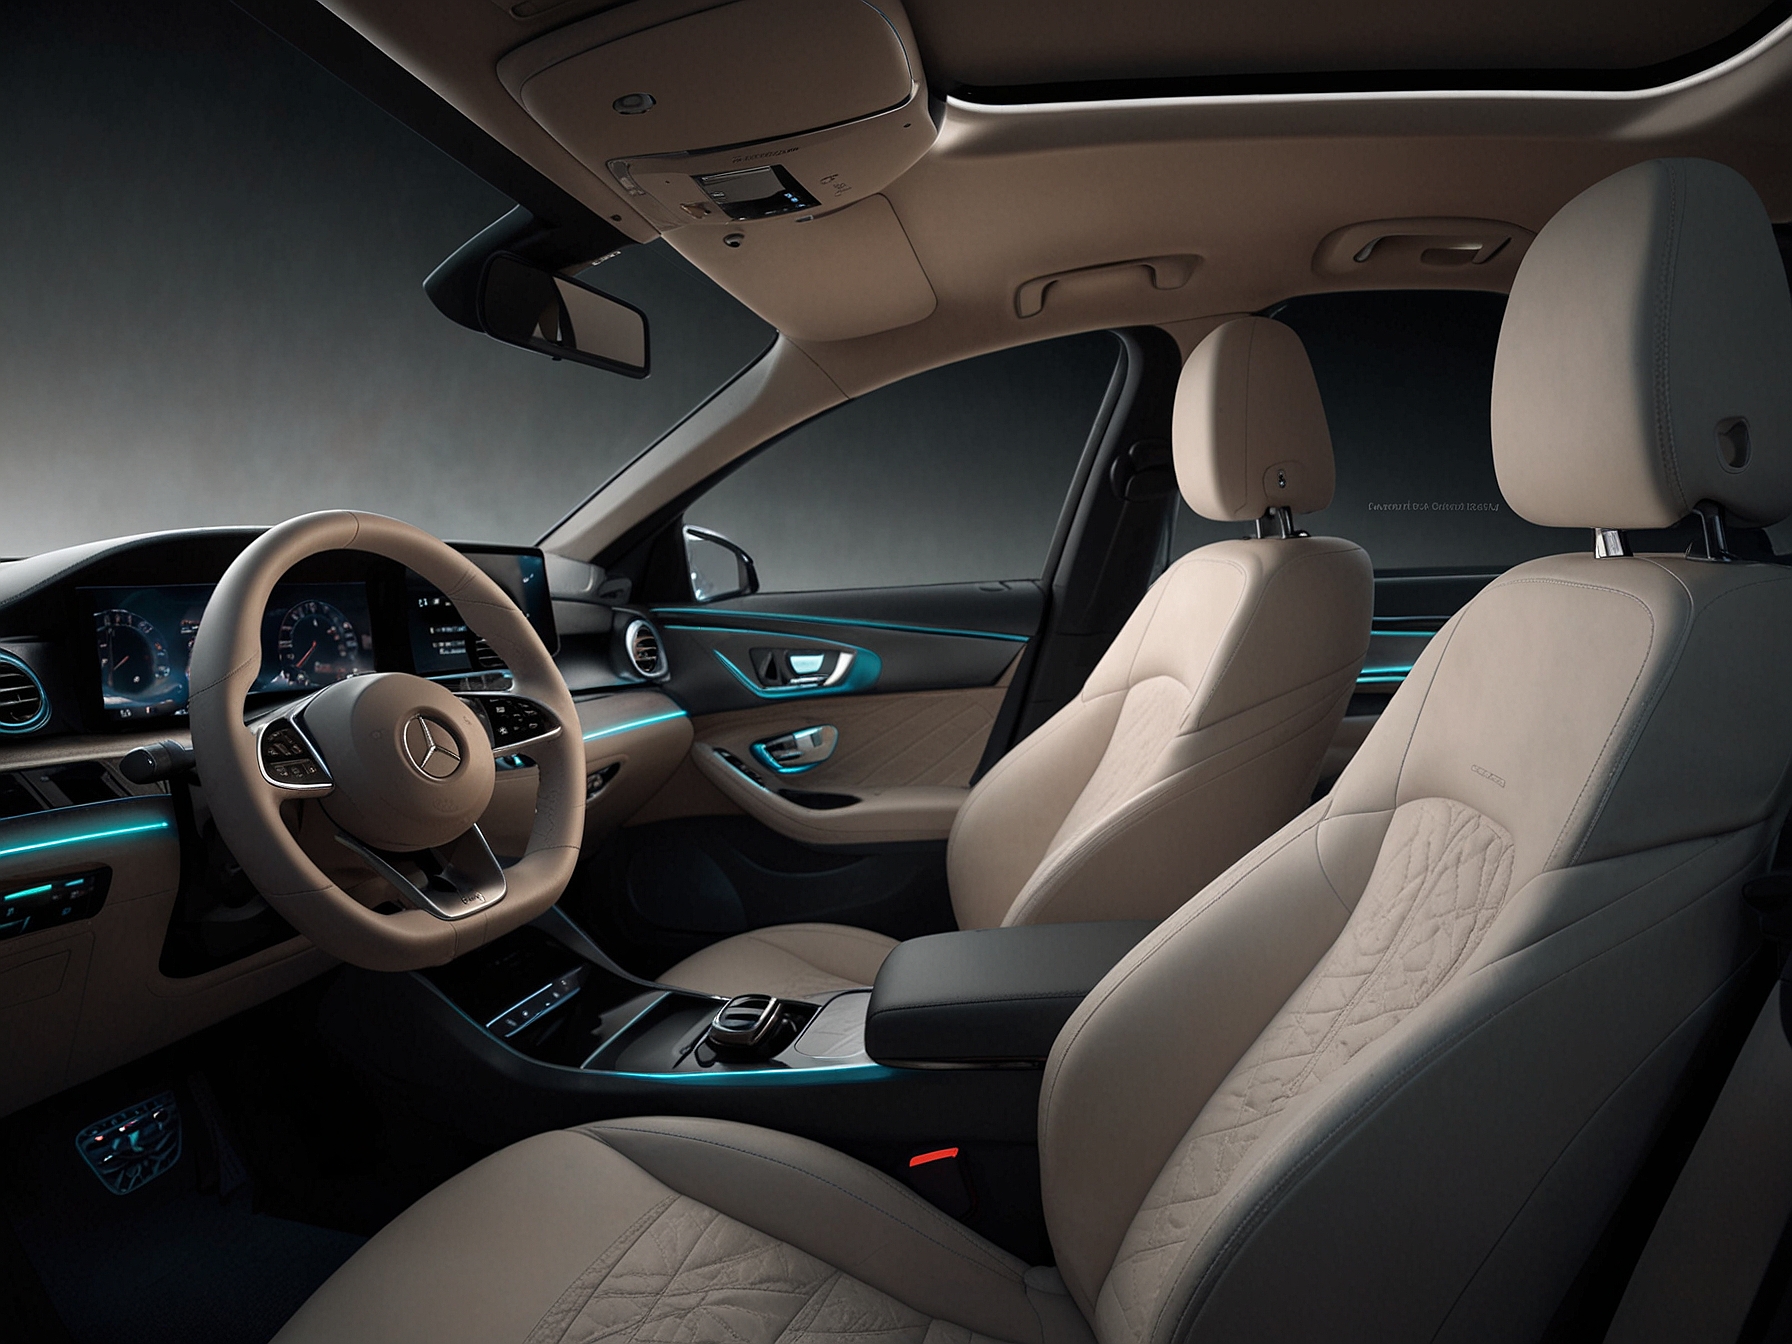 Interior shot of the Mercedes-Benz EQA 250, highlighting its high-quality materials, digital dashboard, and MBUX infotainment system, portraying a luxurious and tech-savvy cabin.